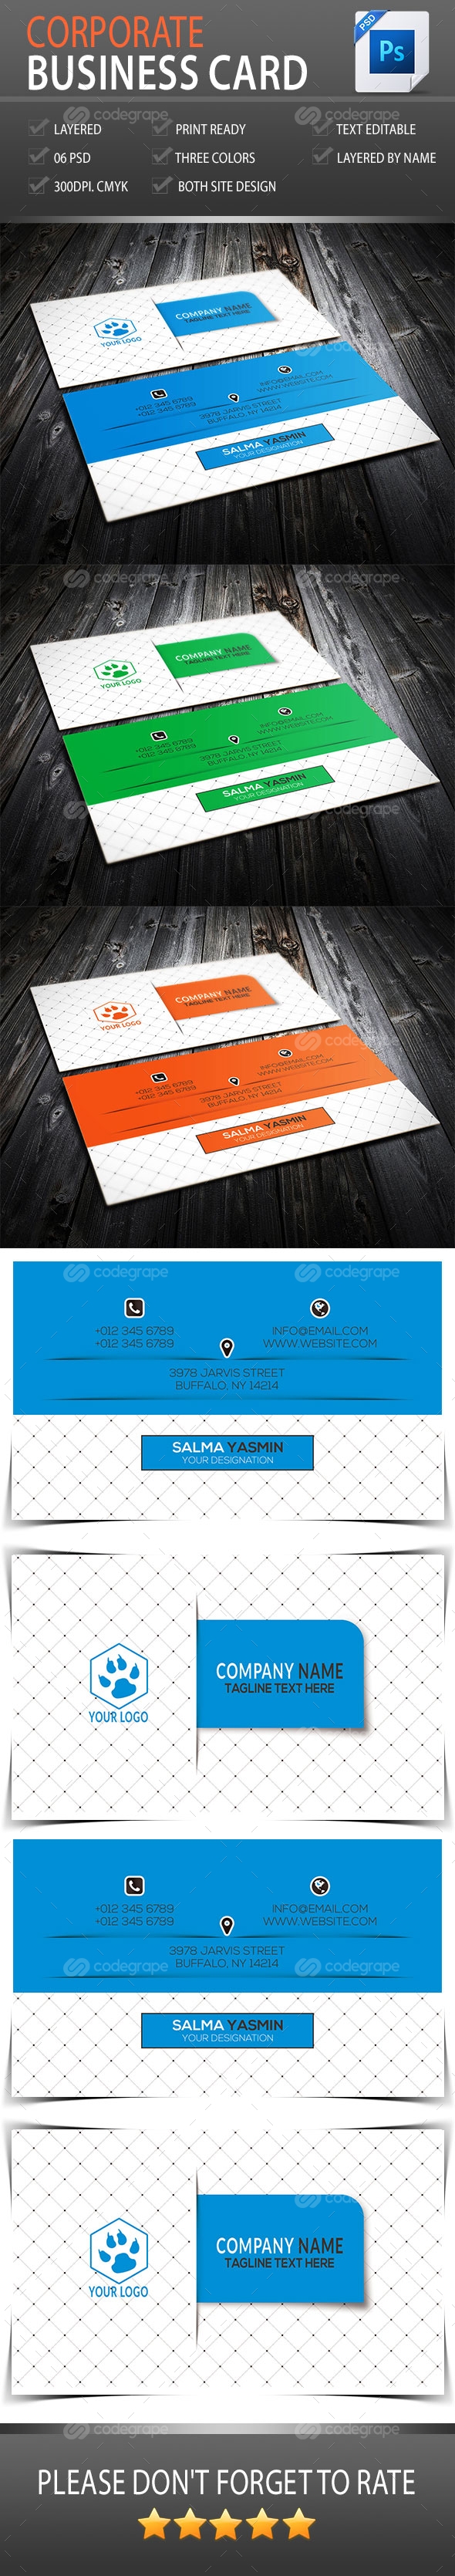 Corporate Business Card Vol-5.0 (Three Color)